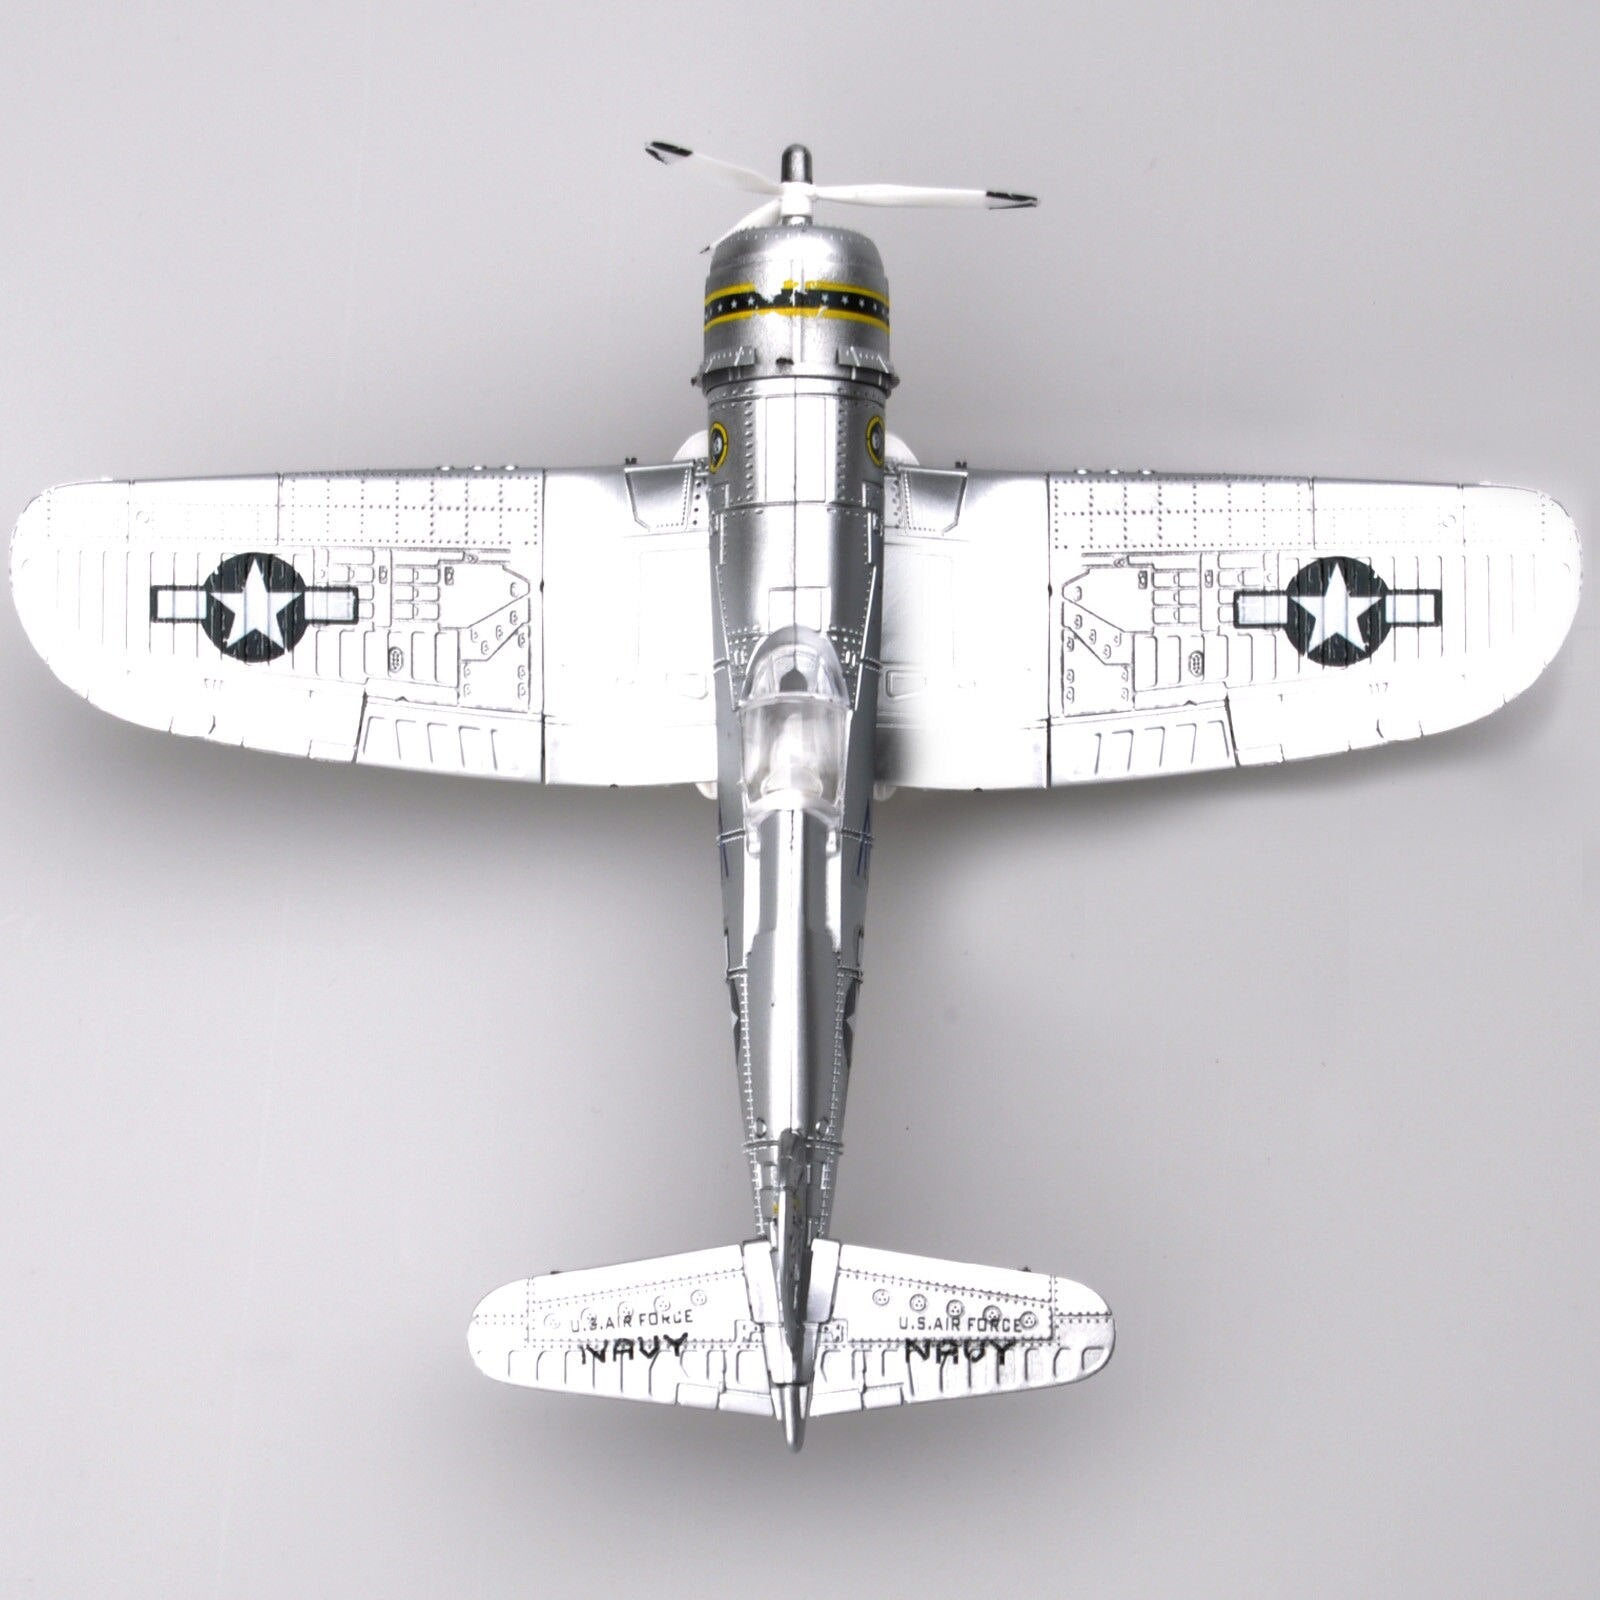 Build History: 1/48 Scale US NAVY F4U Corsair Fighter Assembly Model